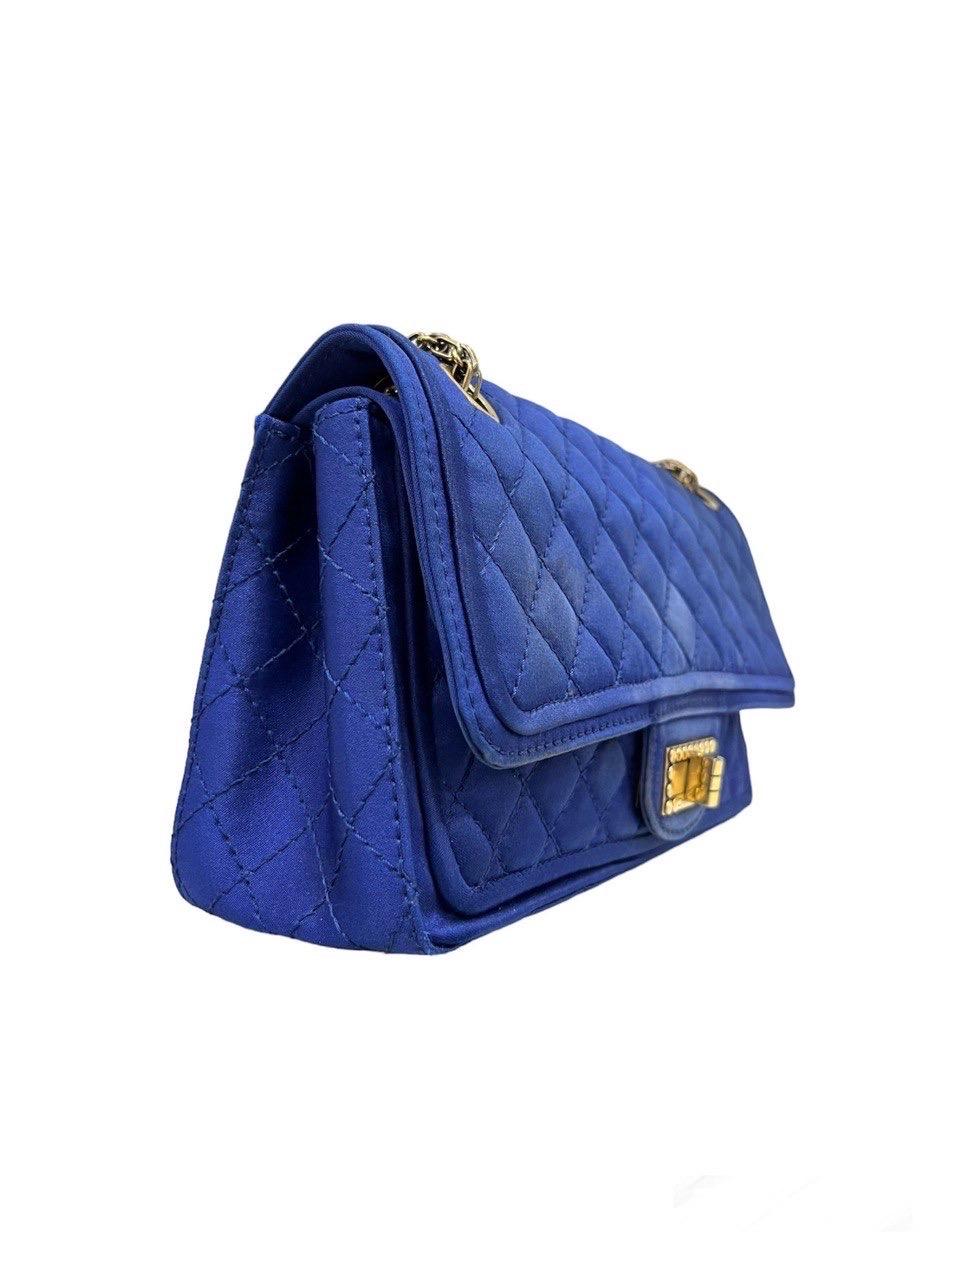 Borsa A Tracolla Chanel Reissue Blue Jersey 2009/2010 In Good Condition For Sale In Torre Del Greco, IT